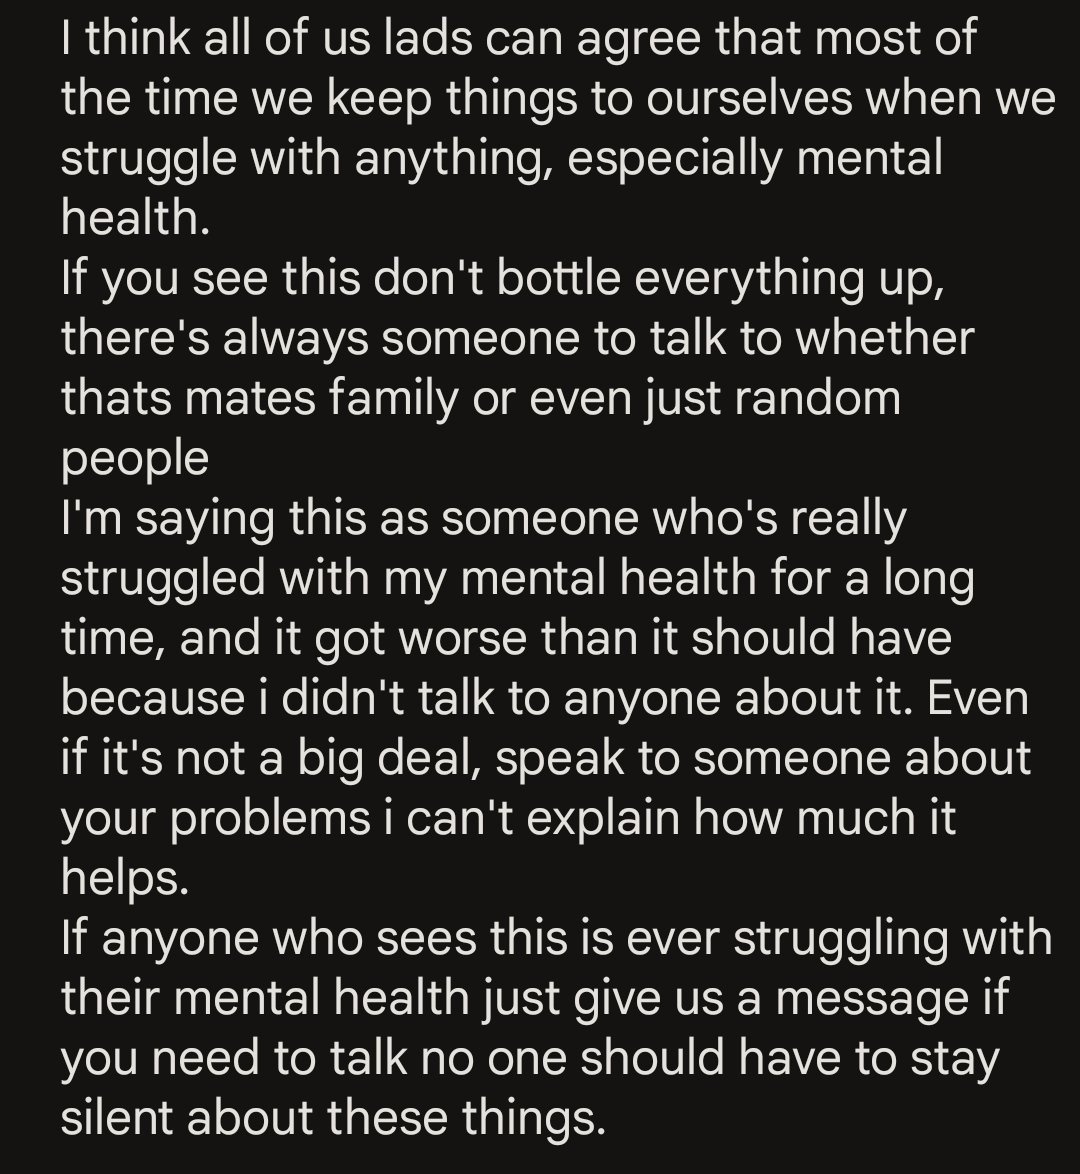 It's okay not to be okay lads, dms open if anyone needs to get owt off their chest #mensmentalhealthmonth